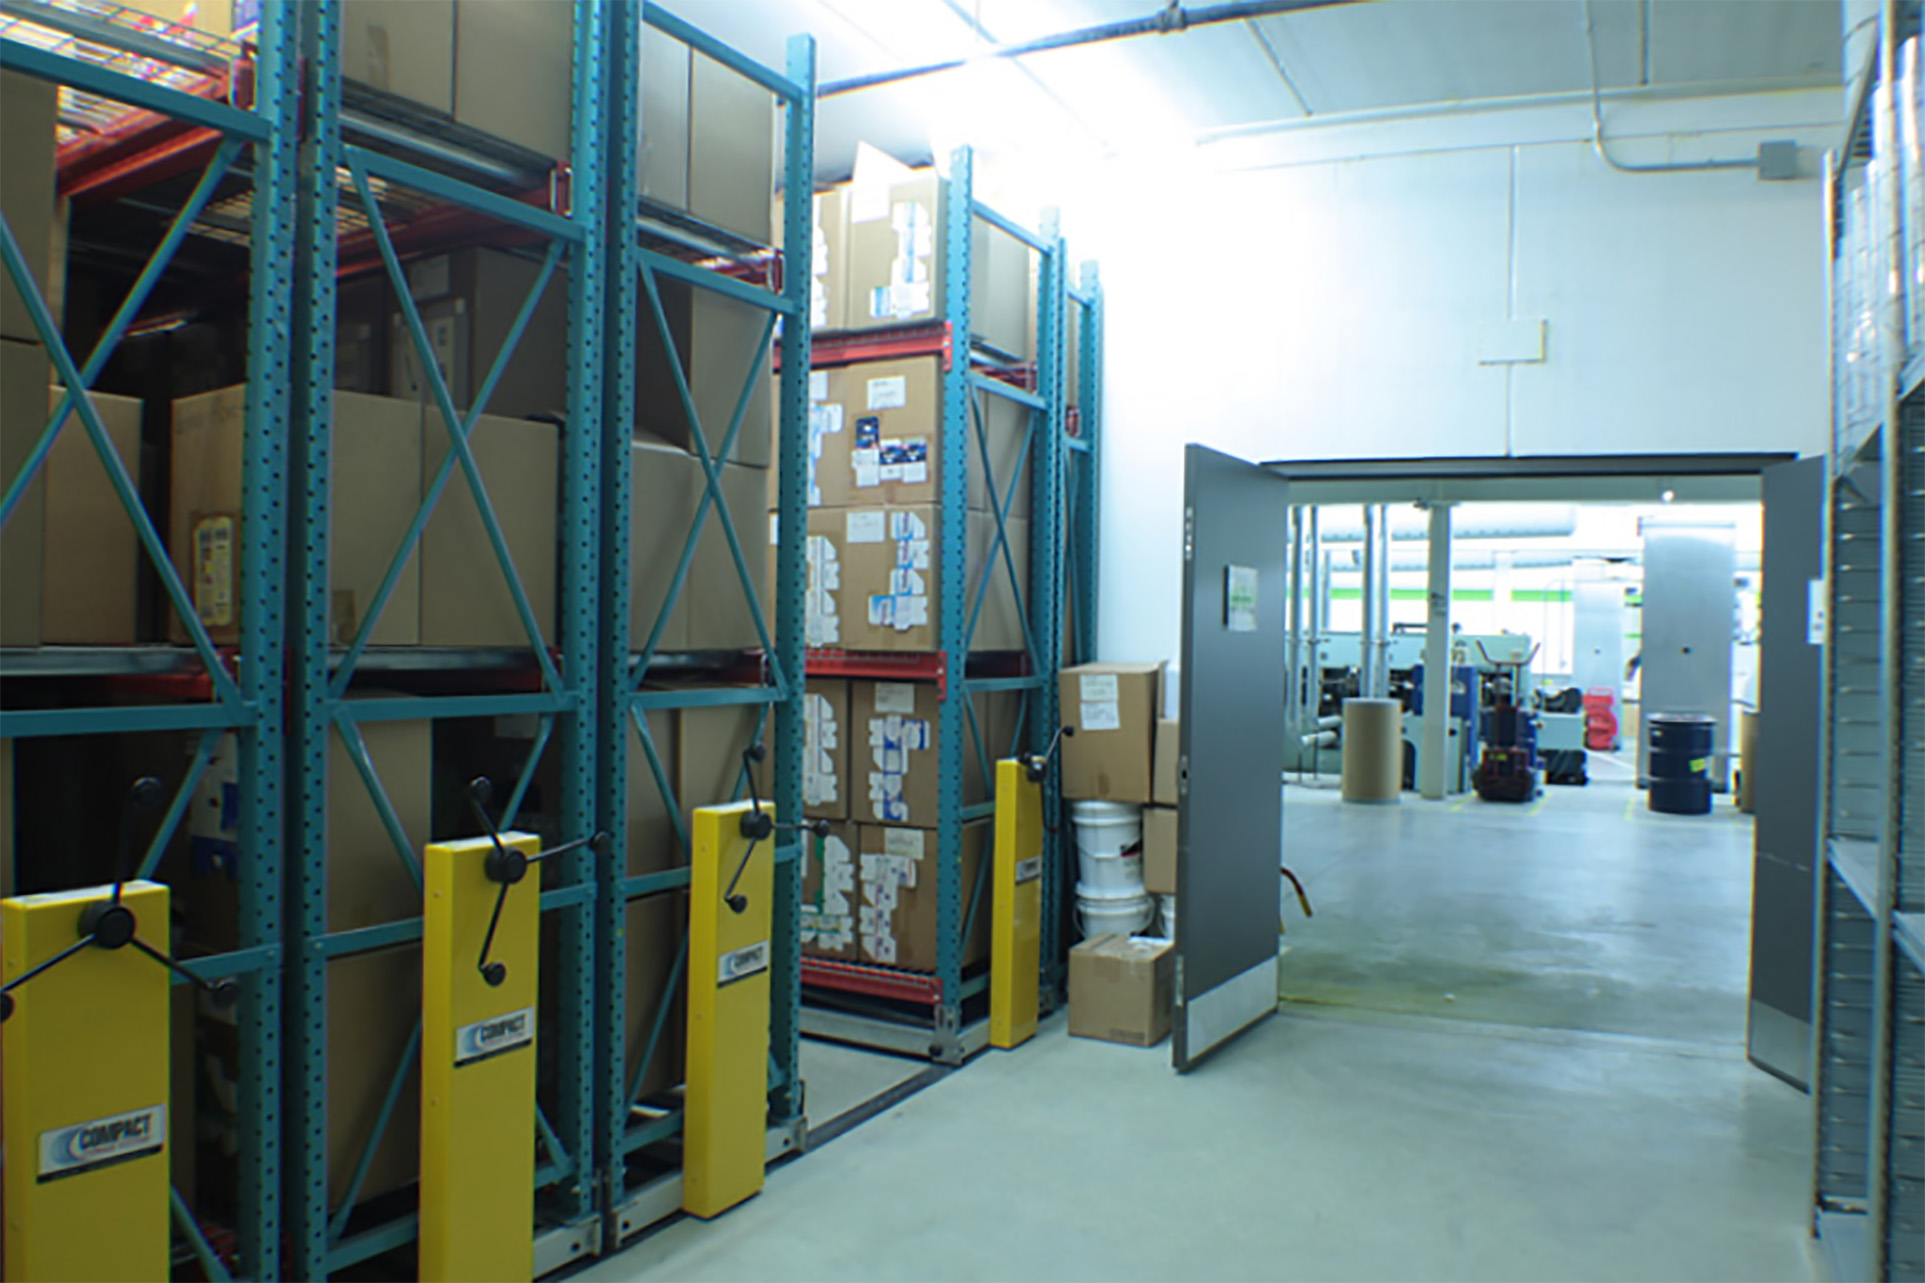 Printing supplies on mechanical assist compact warehouse racking system